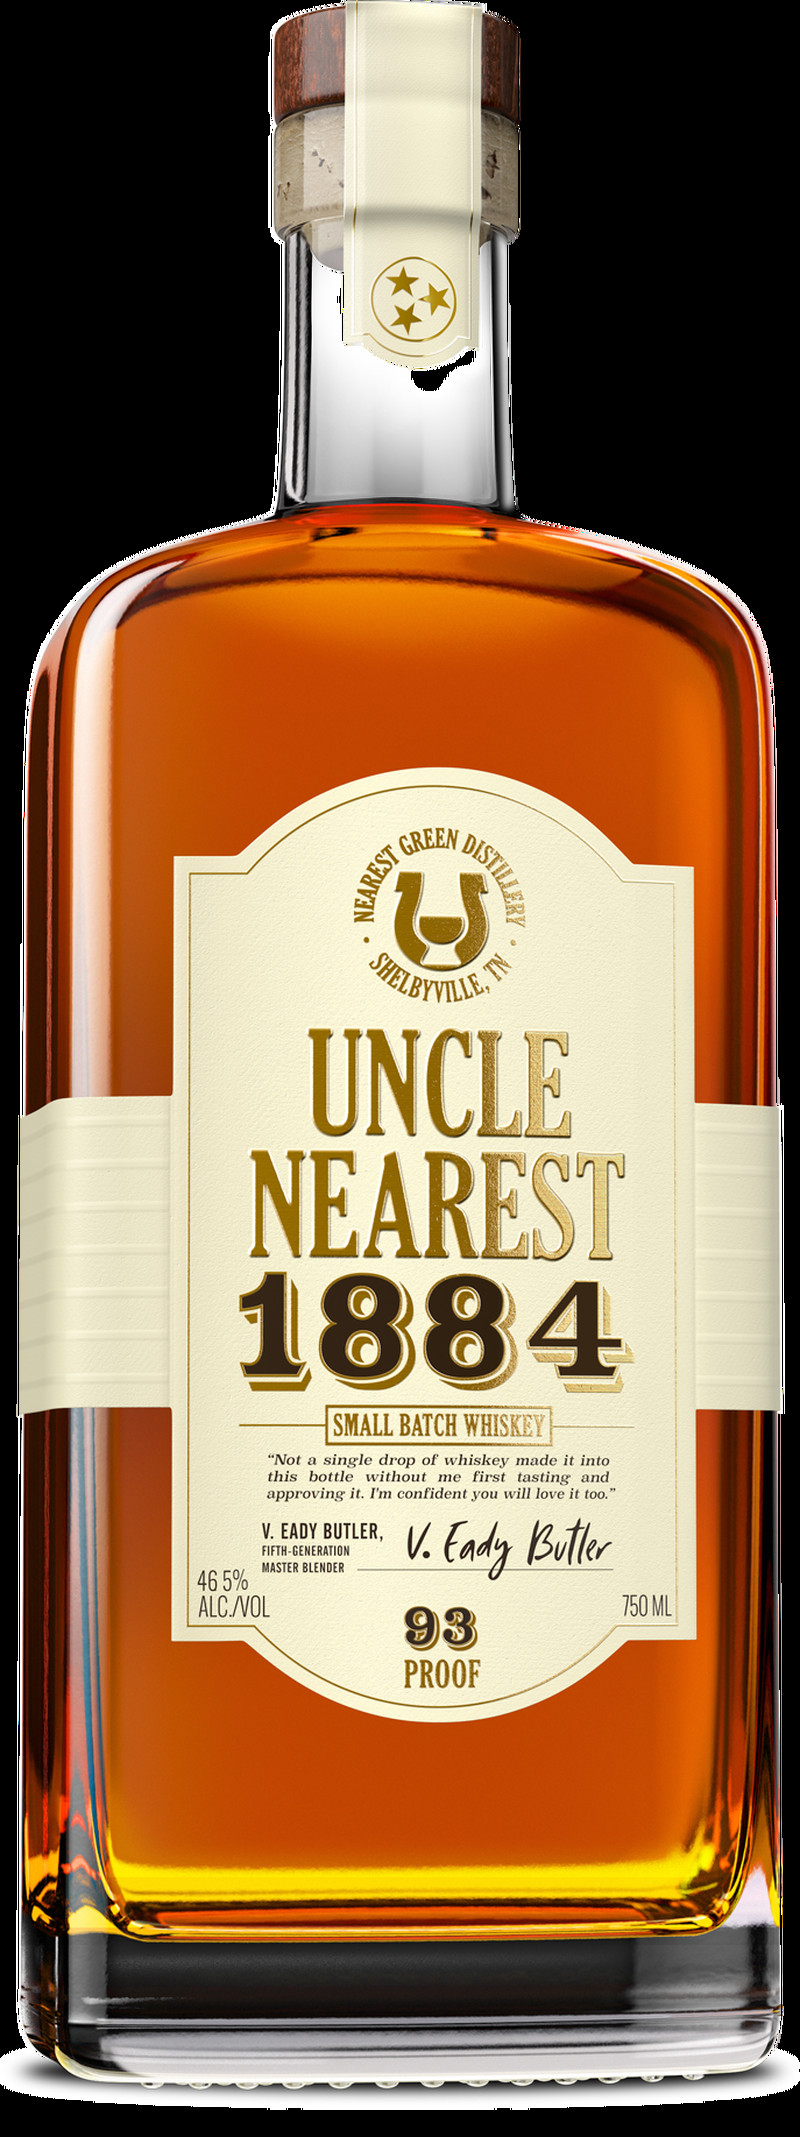 UNCLE NEAREST 1884 SMALL BATCH 93 PROOF WHISKEY